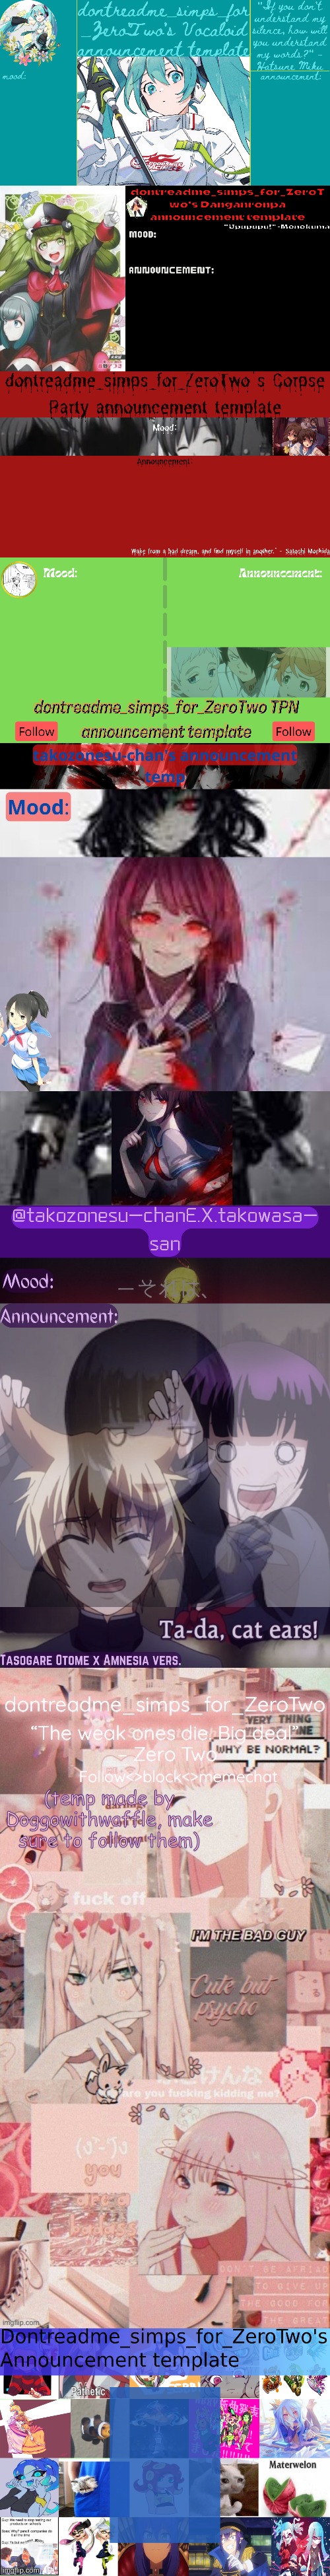 image tagged in drm's vocaloid announcement temp,drm's danganronpa announcement temp,drm's corpse party template announcement | made w/ Imgflip meme maker